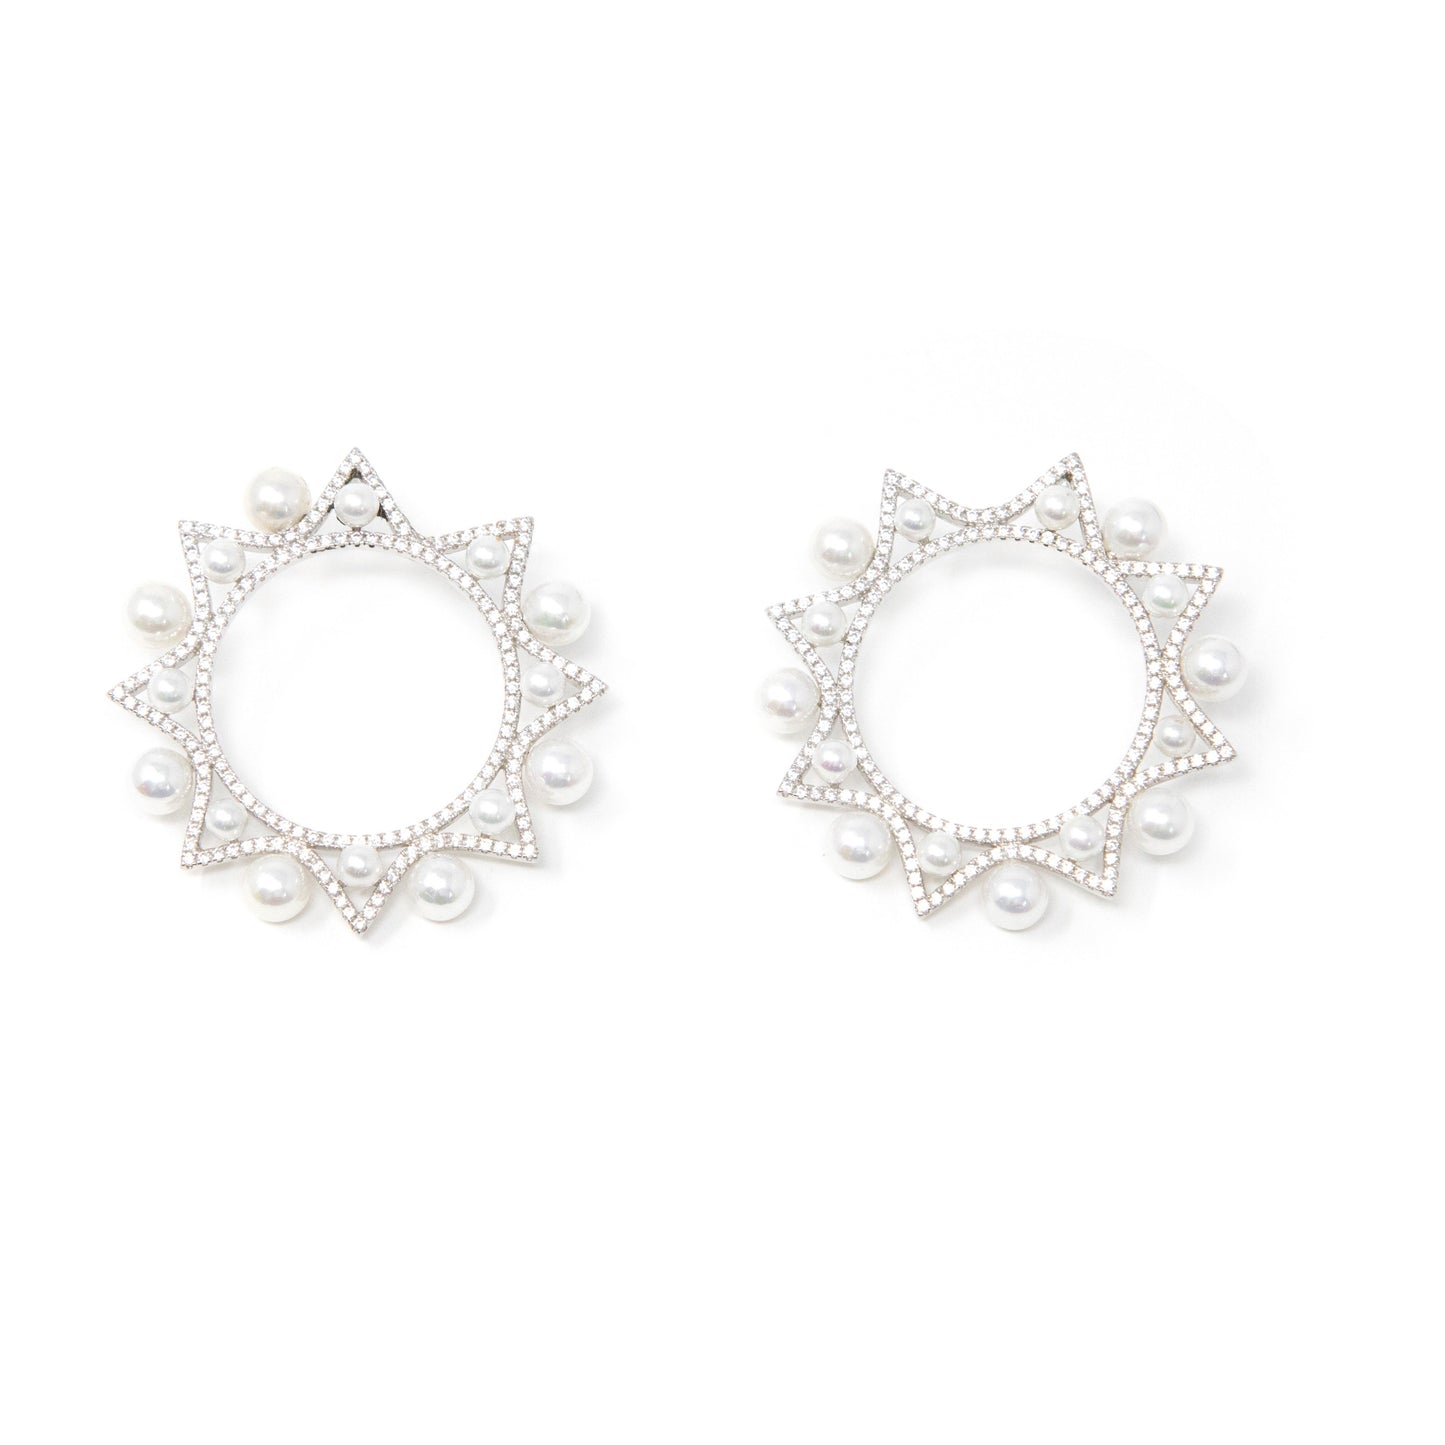 Pearl and Crystal Wreath Earrings JEWELRY The Sis Kiss